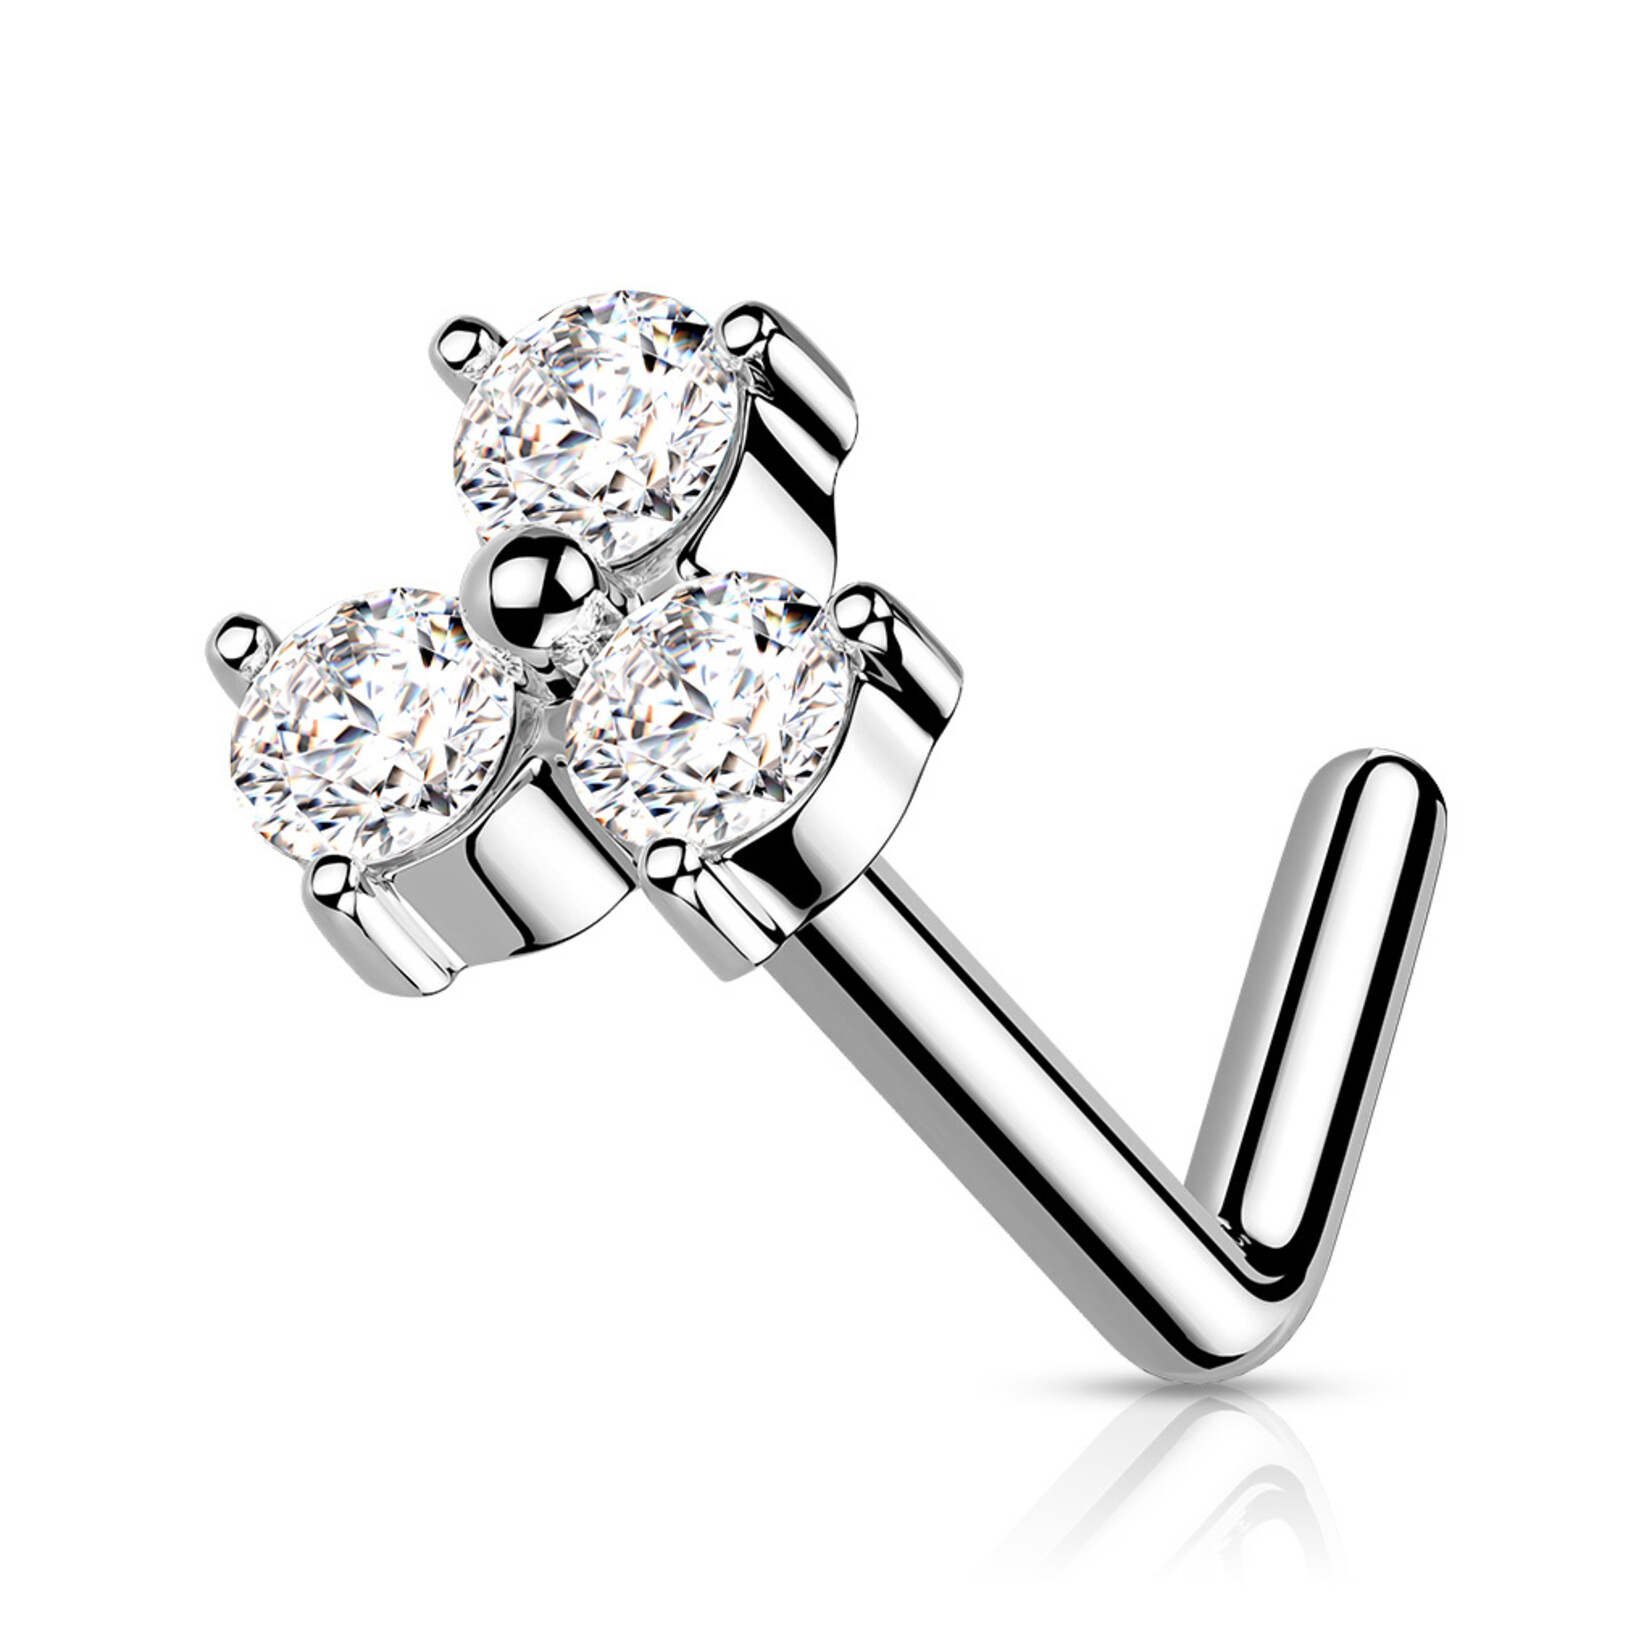 Hollywood Body Jewelry Three Crystal L Bend Nose Stud